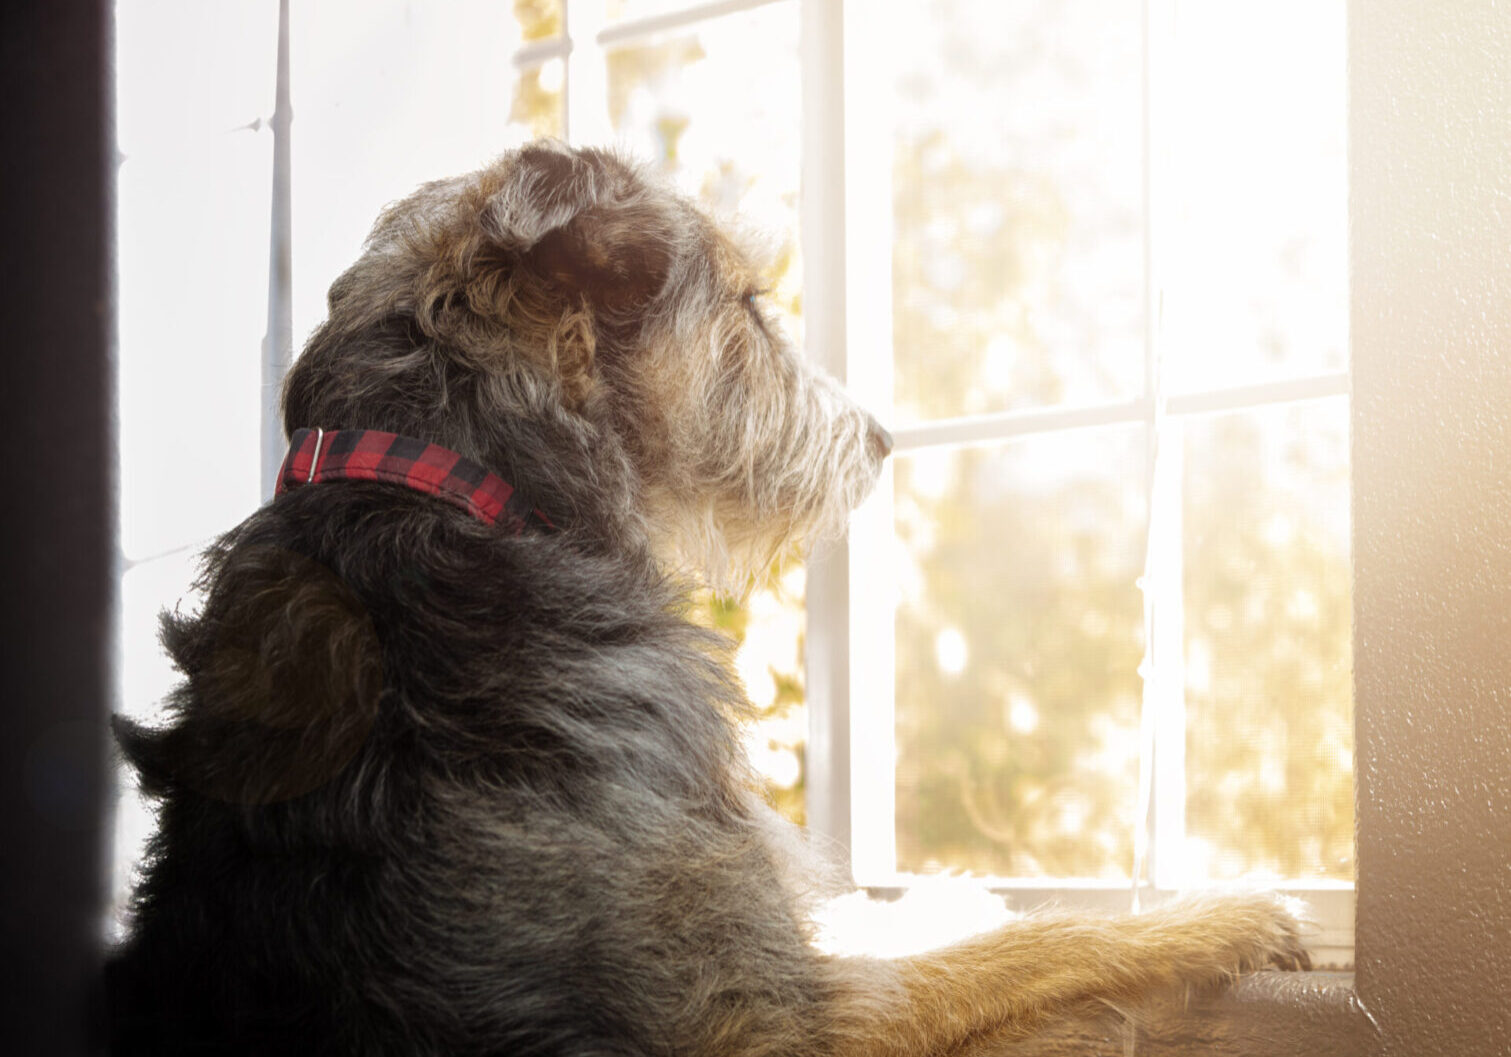 Sad lonely dog with separation anxiety looking out a window for owners to return home